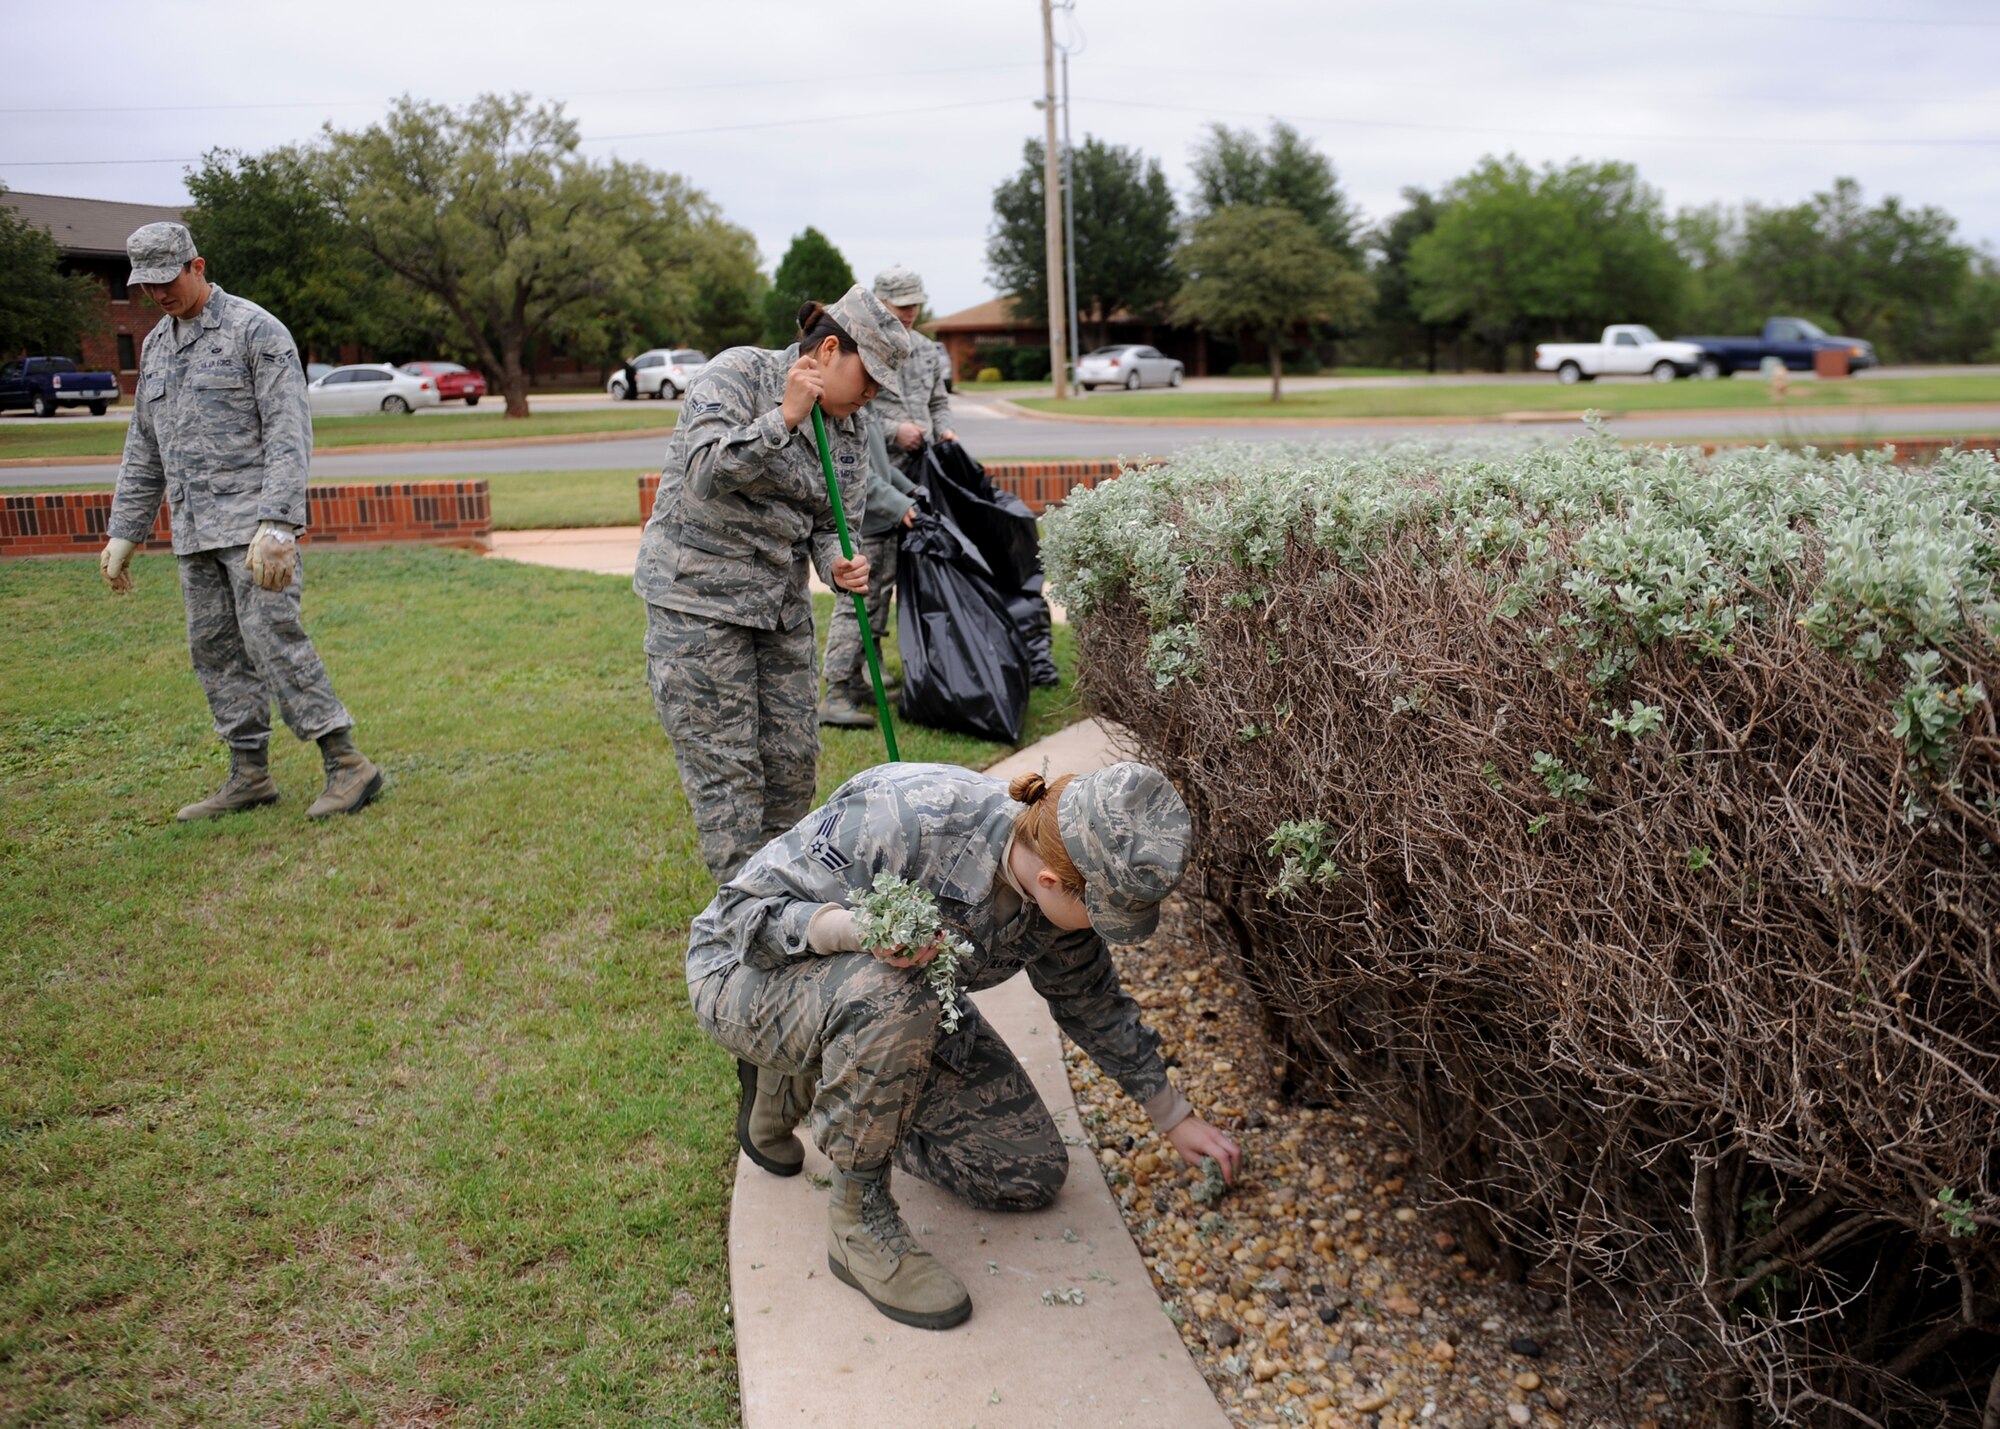 Airmen who work in the 7th Bomb Wing Headquarters building pick up weeds and trash Oct. 18, 2013 at Dyess Air Force Base, Texas. They spent around three hours picking up trash and weeds, mowing and edging the lawn and trimming bushes. This event was organized by the 7th Bomb Wing Command Chief, Chief Master Sgt. Eddie Webb as a team building event to bring Airmen together to enhance their workcenter and to encourage others to take pride in theirs.. (U.S. Air Force photo by Airman 1st Class Autumn Velez/Released)